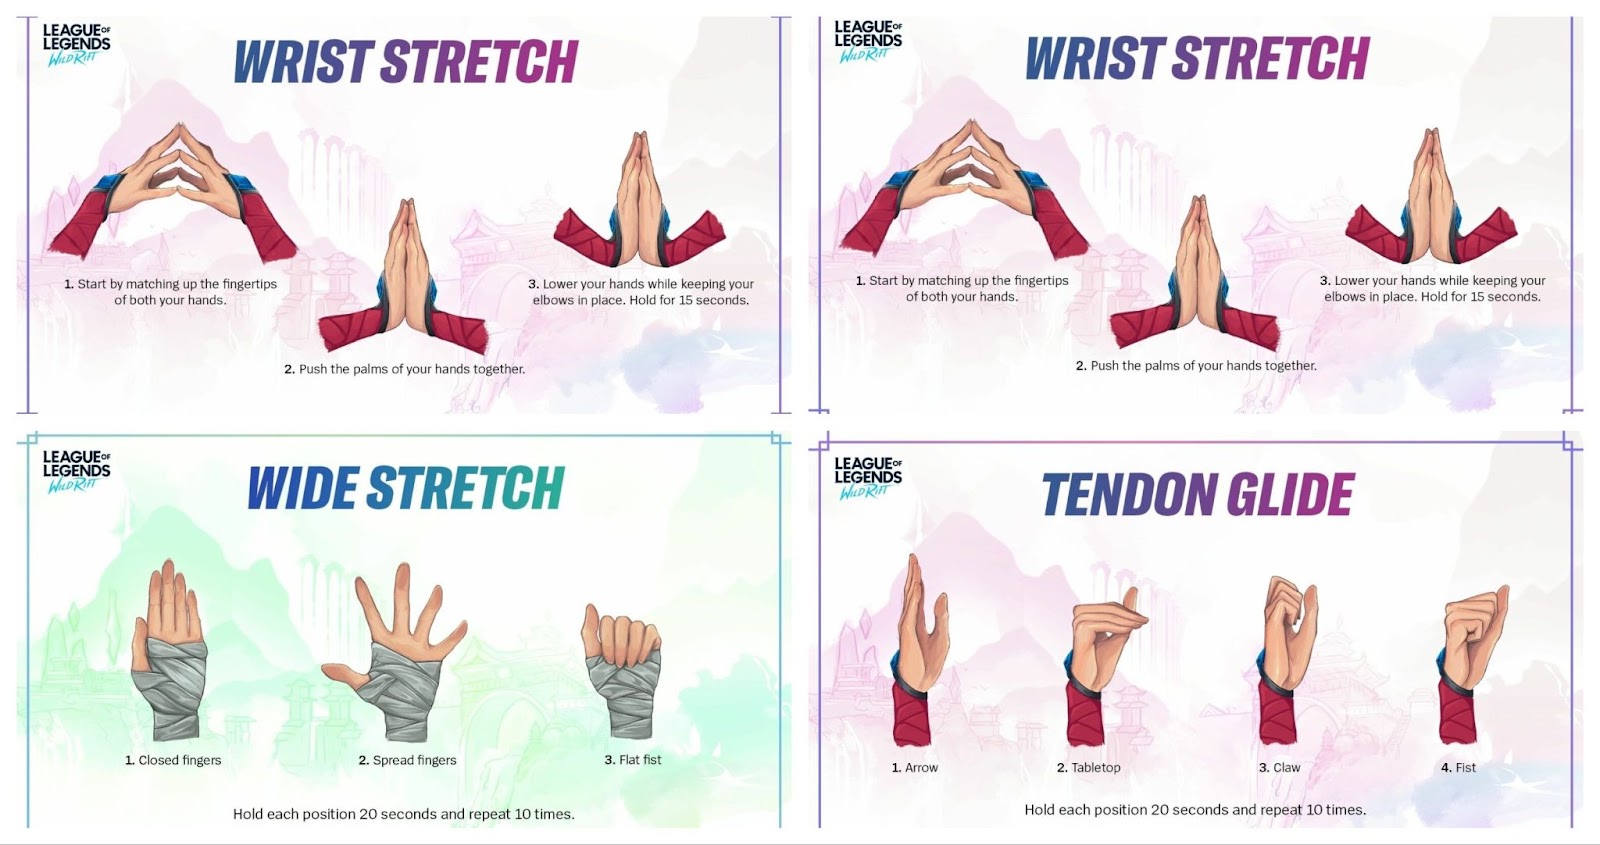 For long-term treatment and strengthening of the thumb, hand, and wrist it is best to do appropriate thumb exercises.